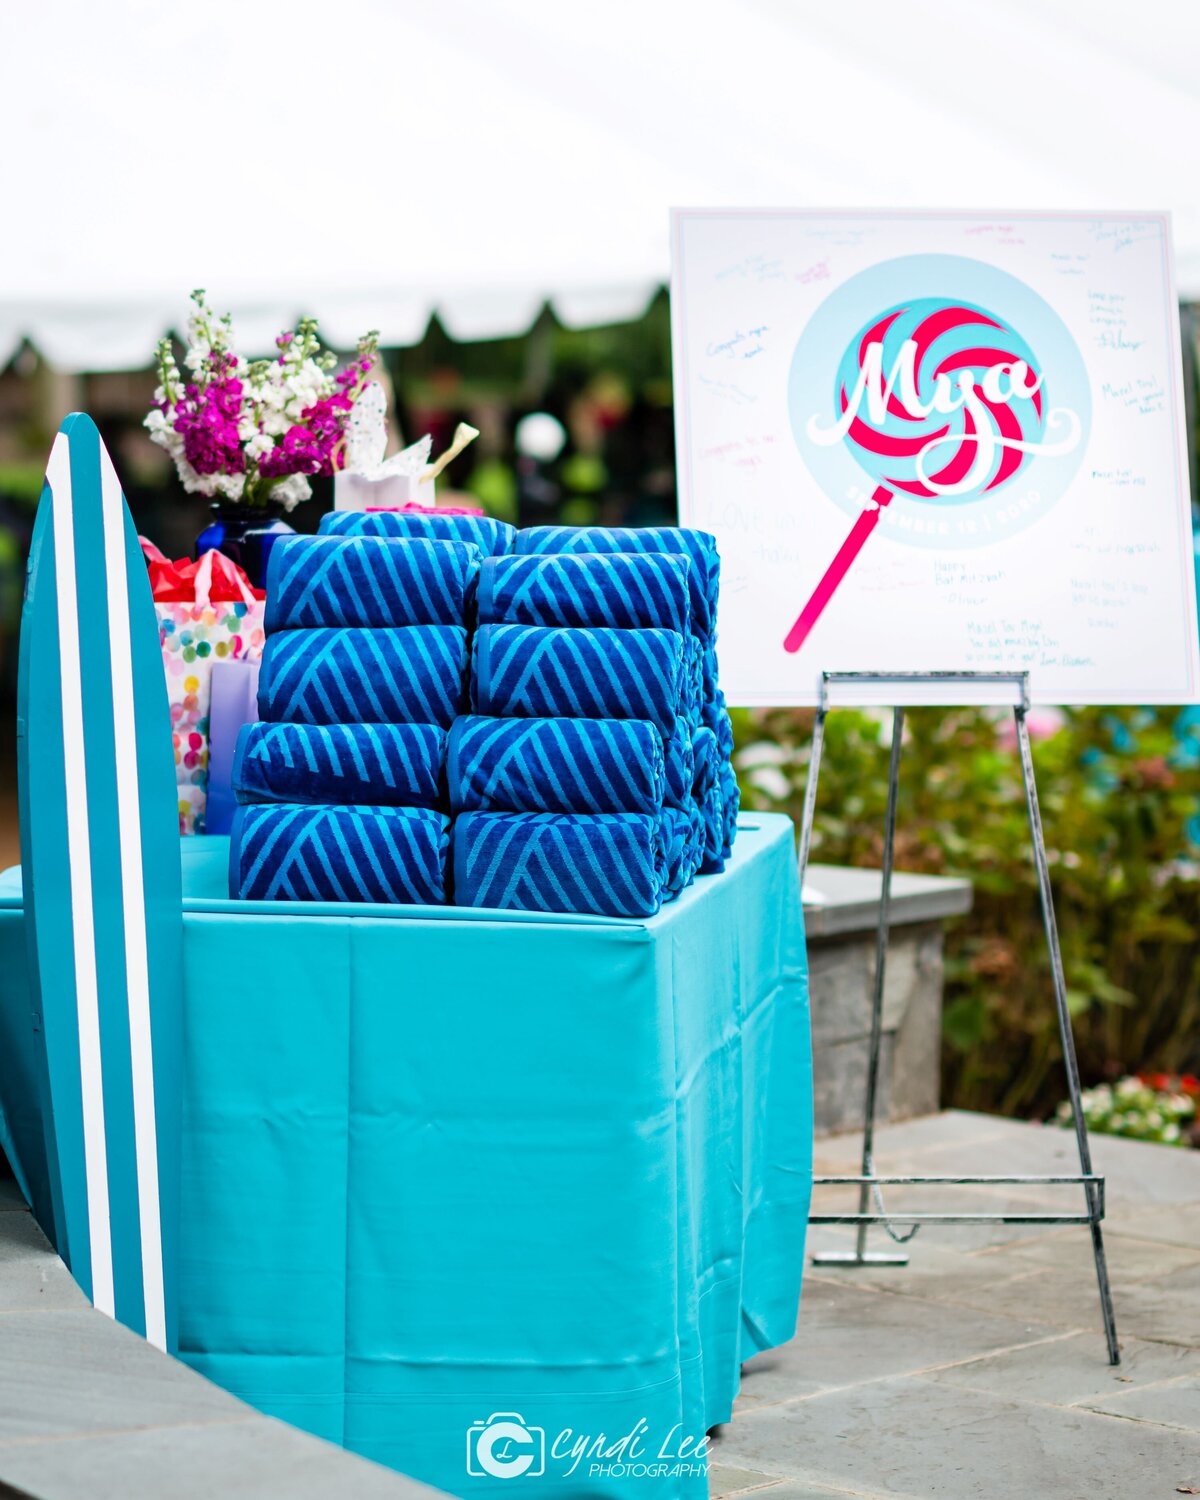 Event-Planning-DC-Beach-themed-Towels-Cyndi-Lee-Photography-